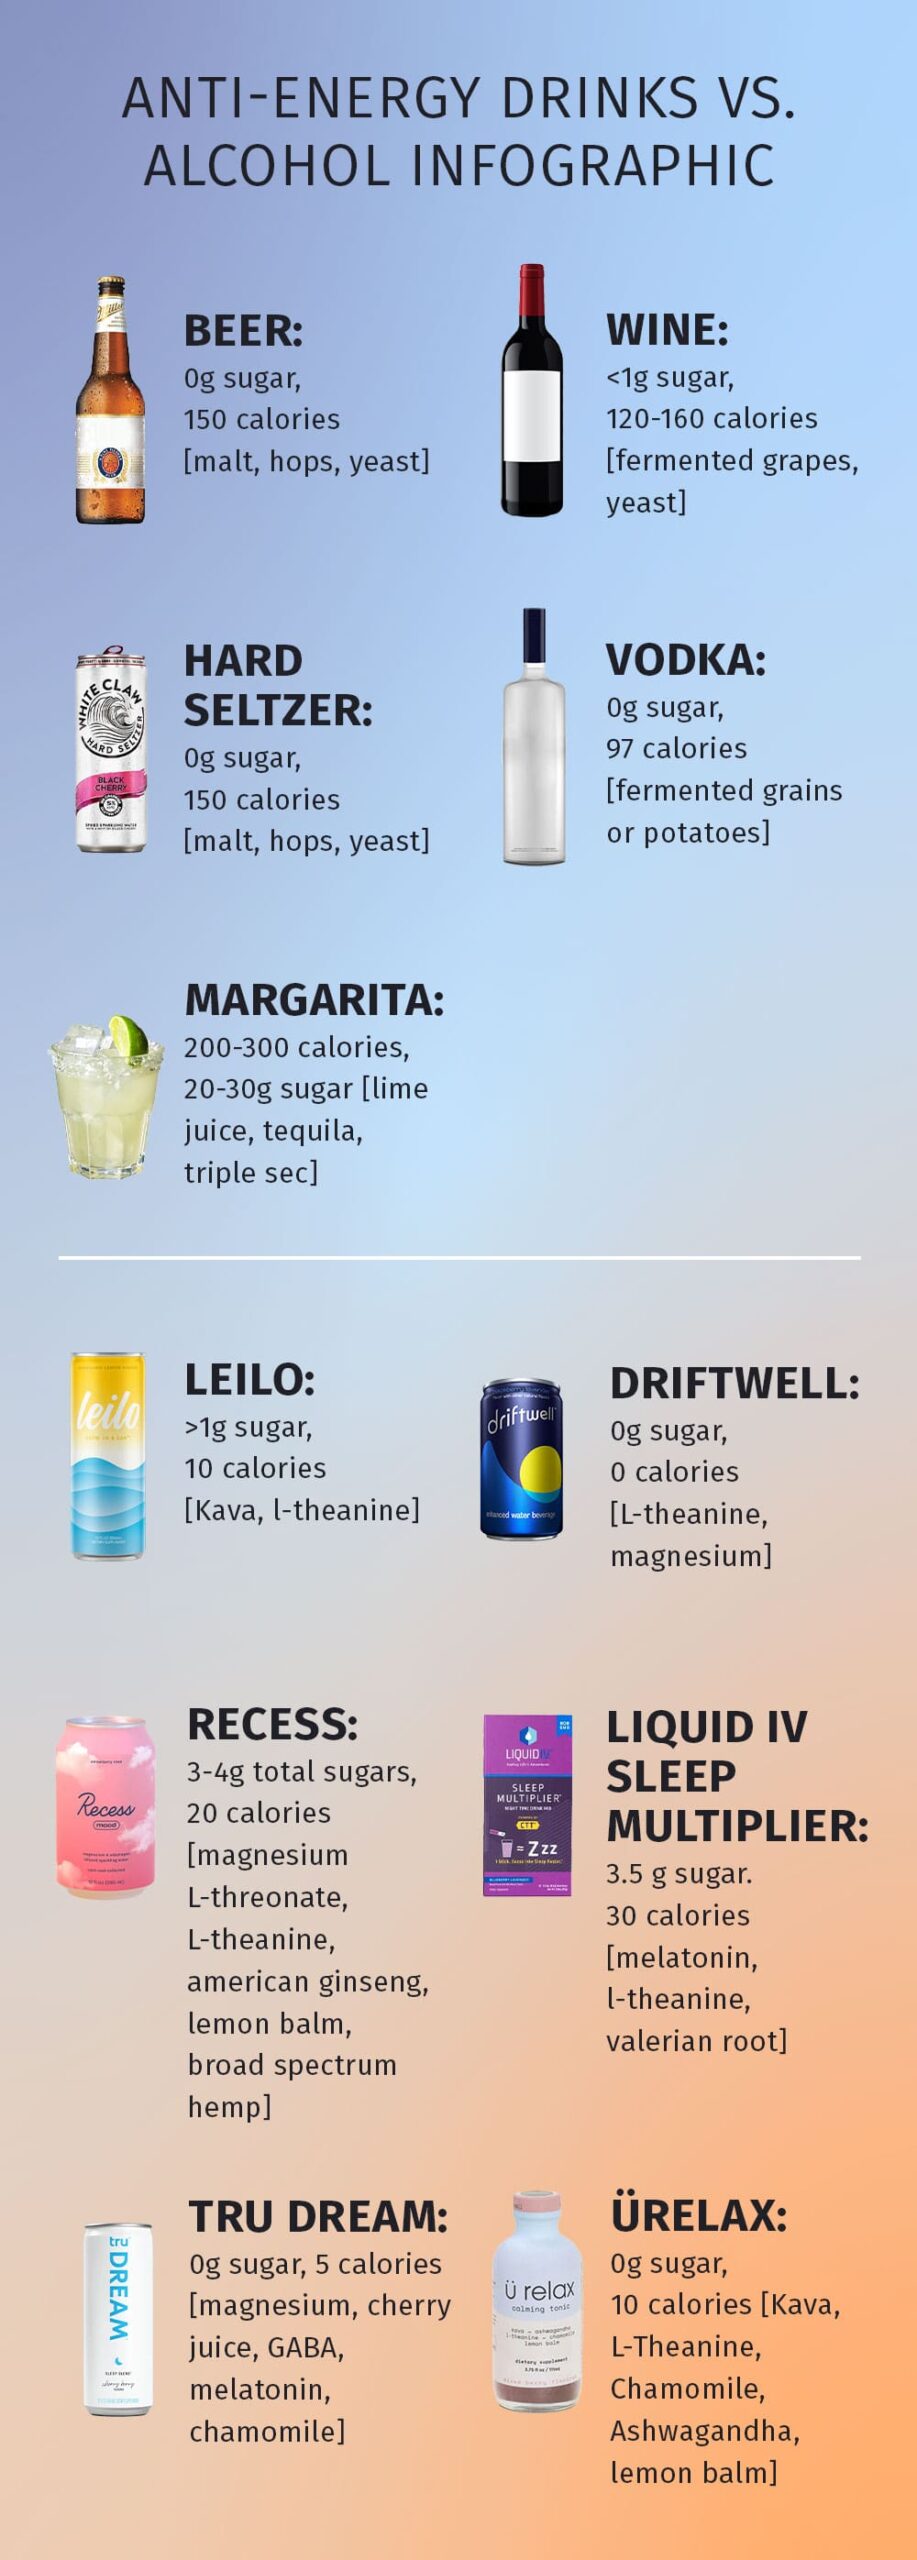 An infographic that depicts popular alcoholic drinks and their sugar levels and compares them to anti-energy drinks